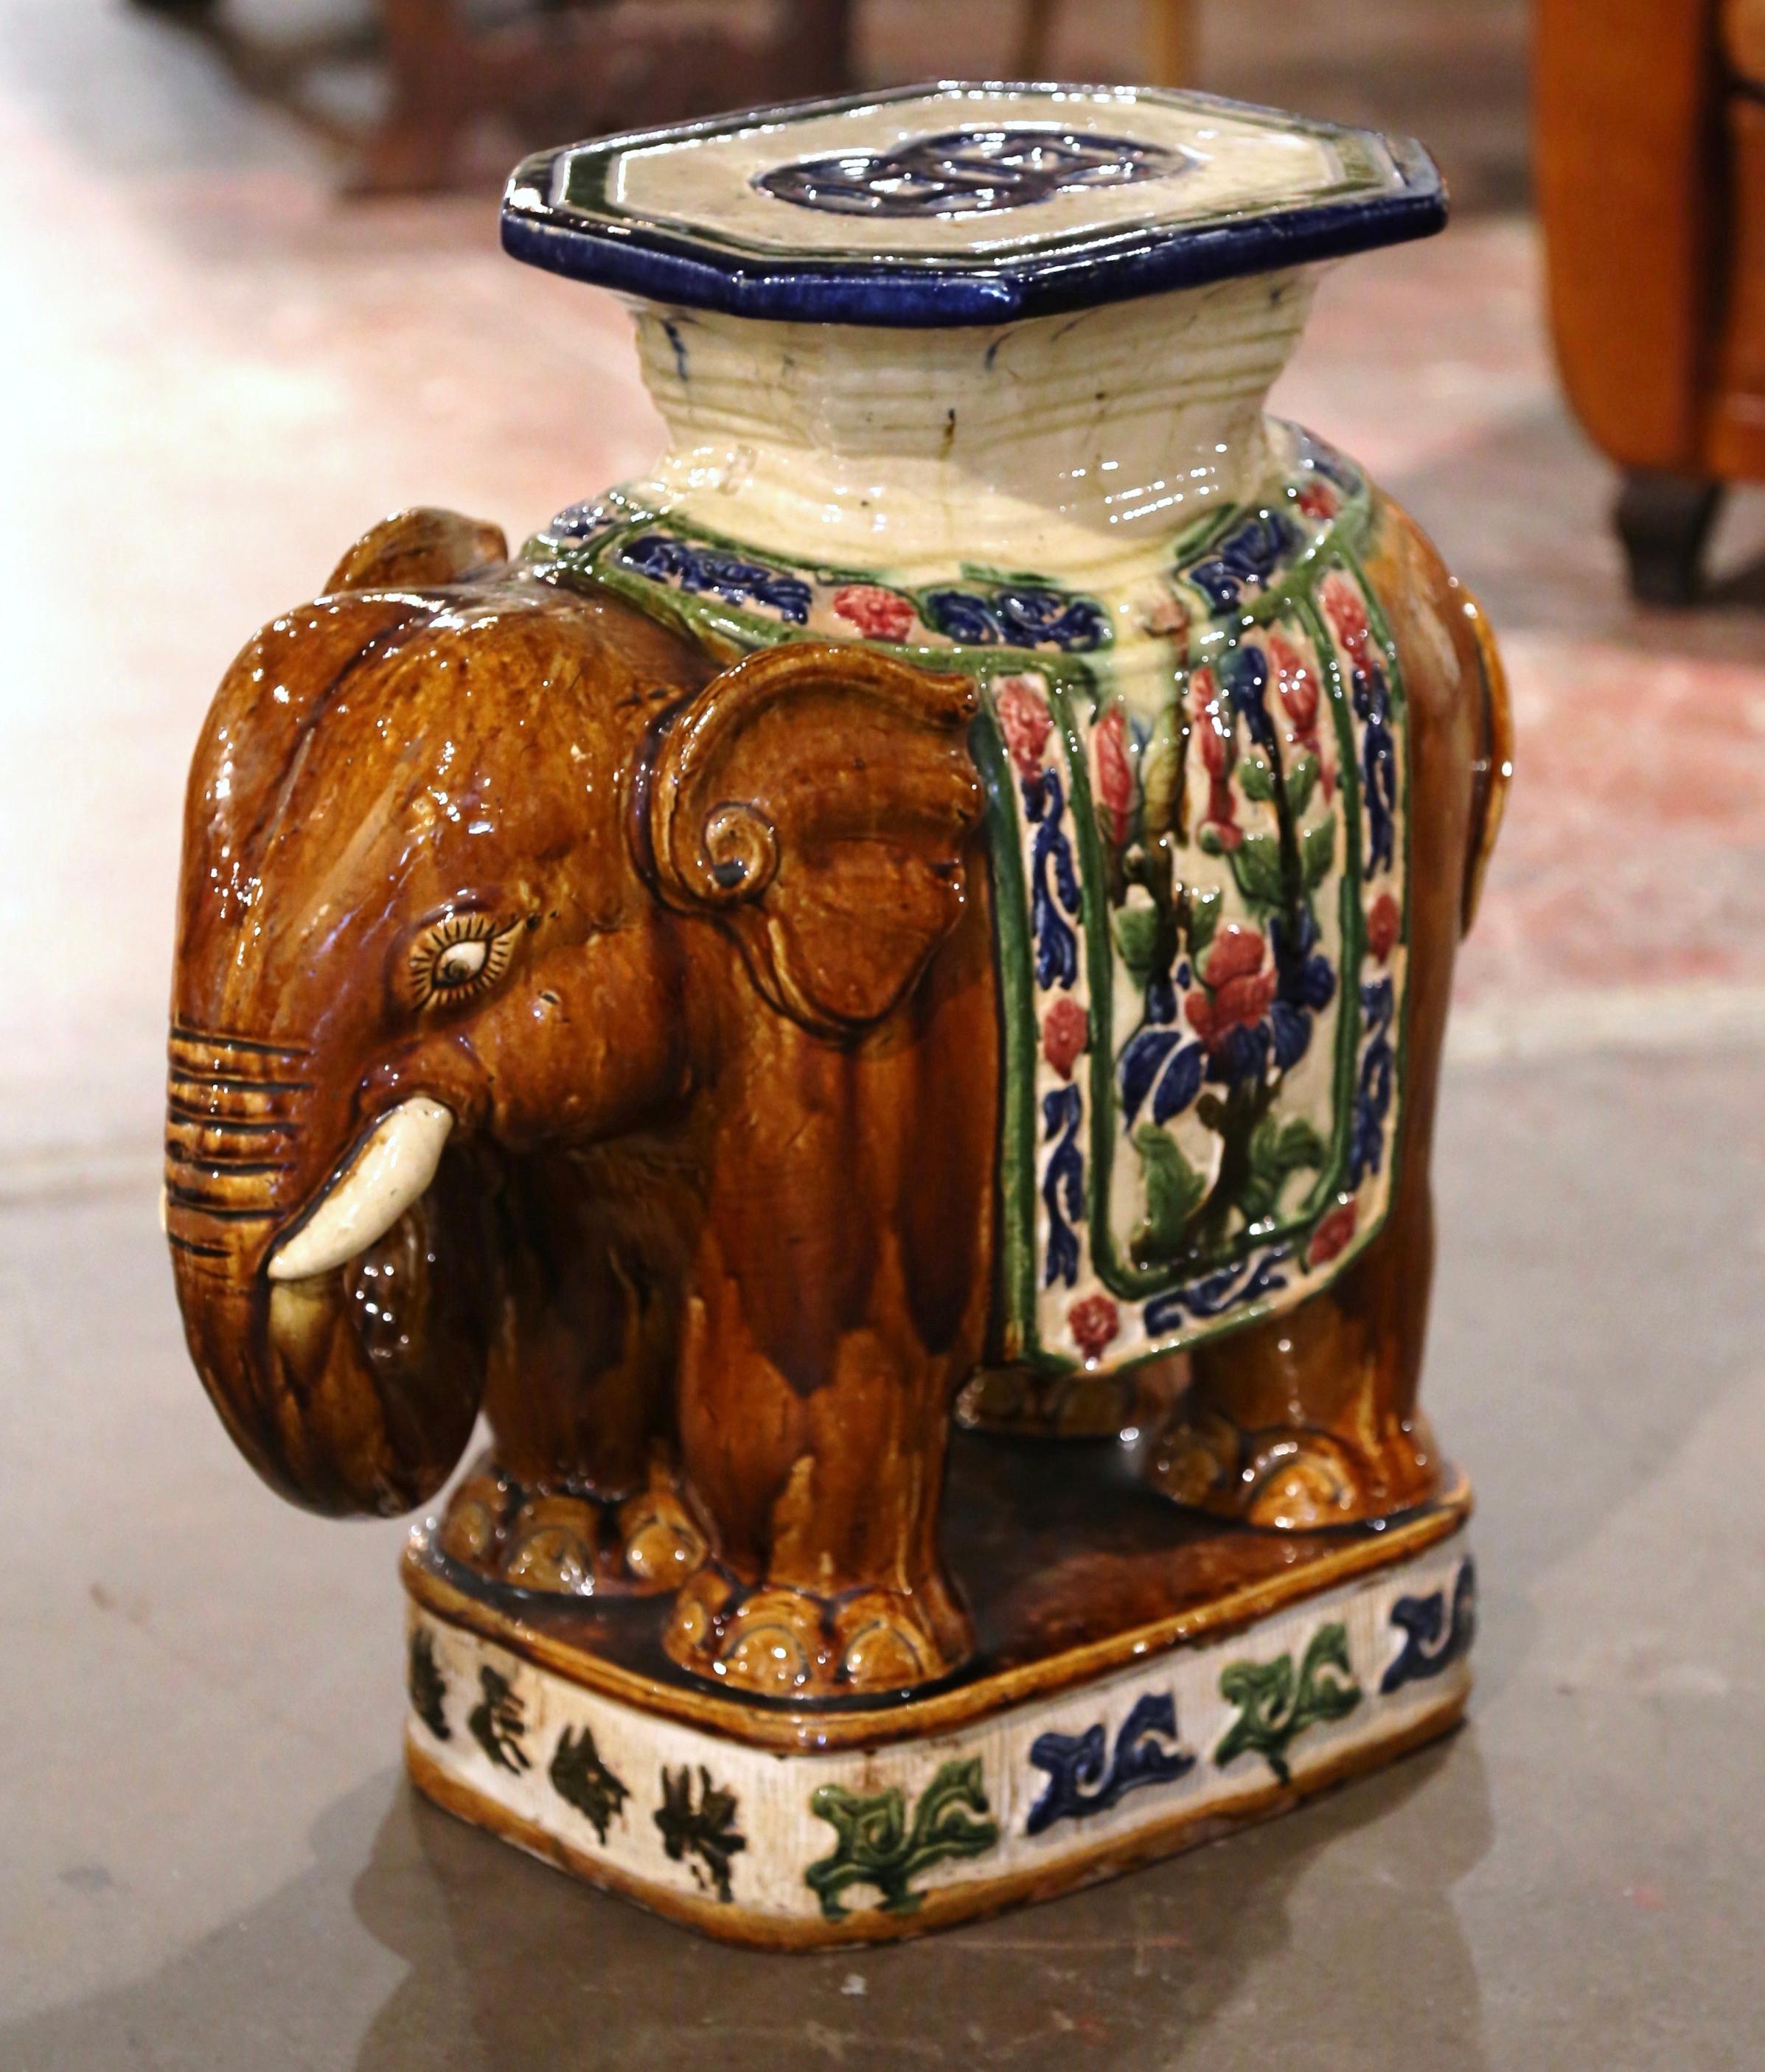 This colorful vintage porcelain garden seat was found in France. Crafted circa 1960, the large ceramic seating shaped as an elephant with his trunk lowered is heavily decorated in oriental finery; the colorful mammal has a rectangular seat at the